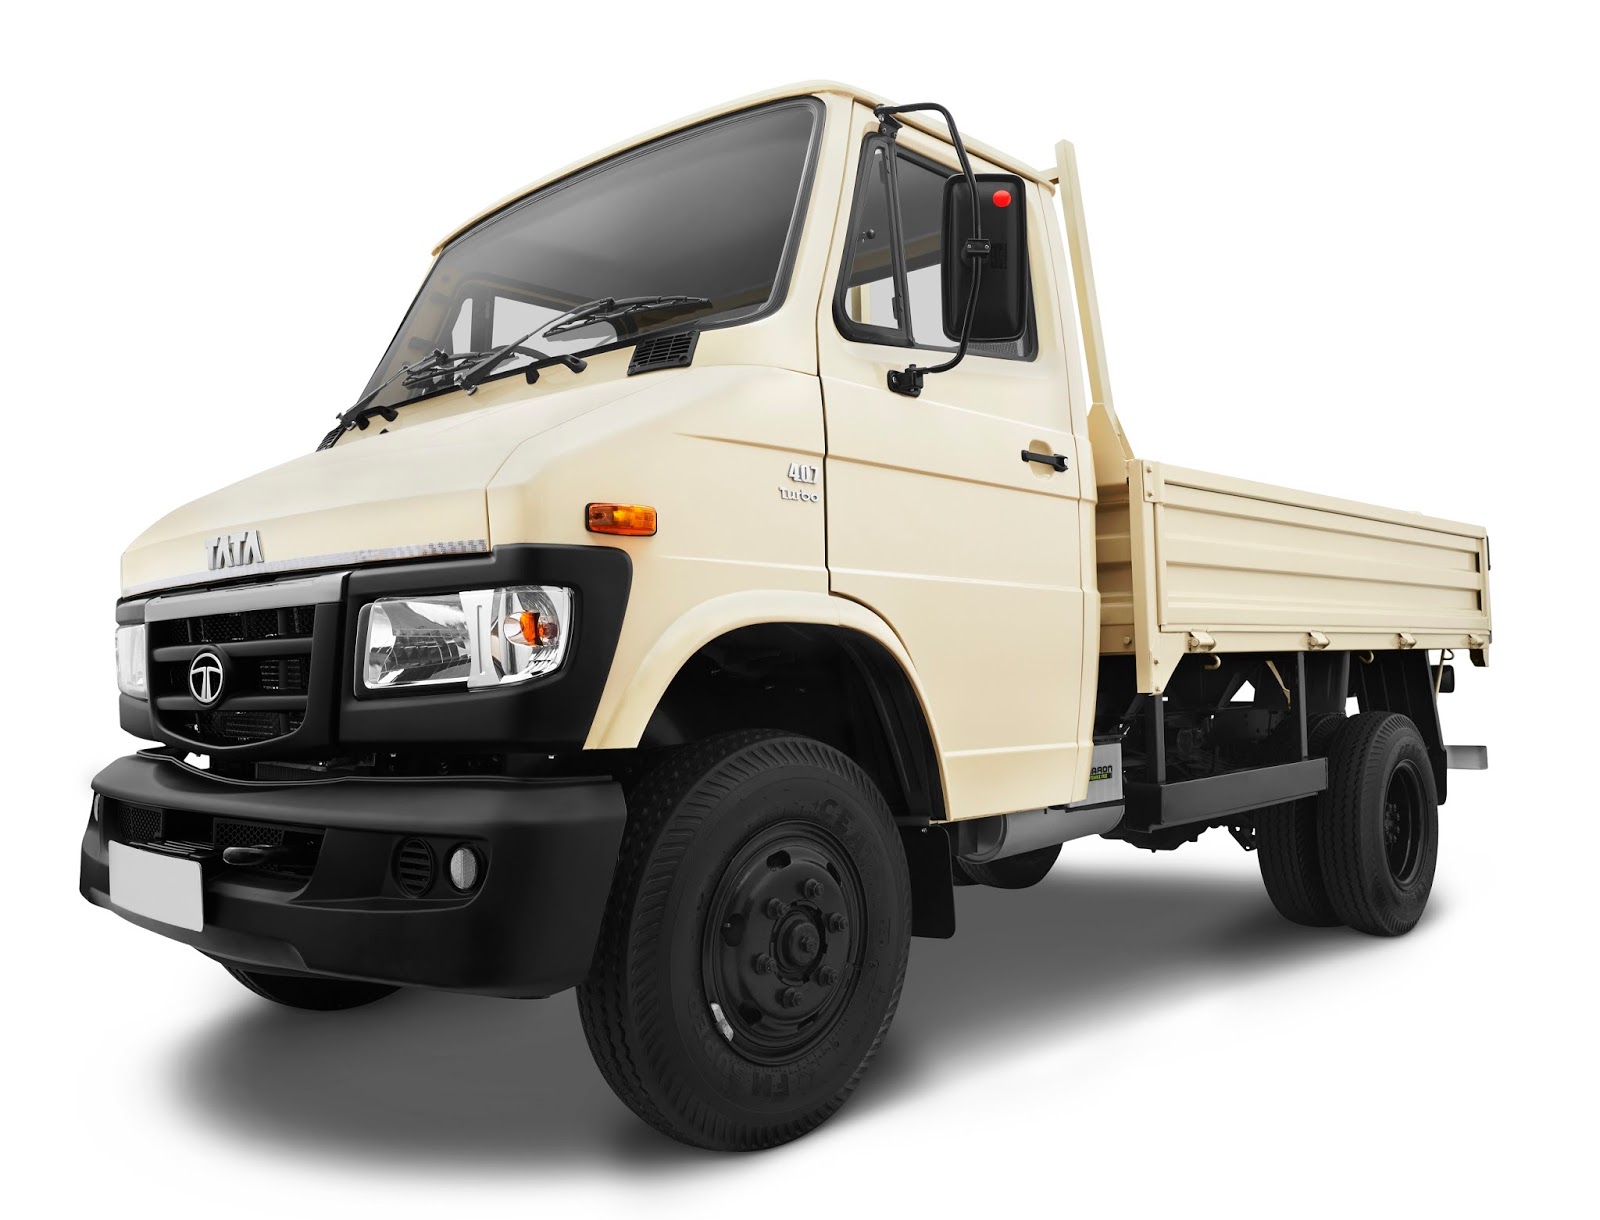 india-s-most-popular-light-commercial-vehicle-tata-407-celebrates-its